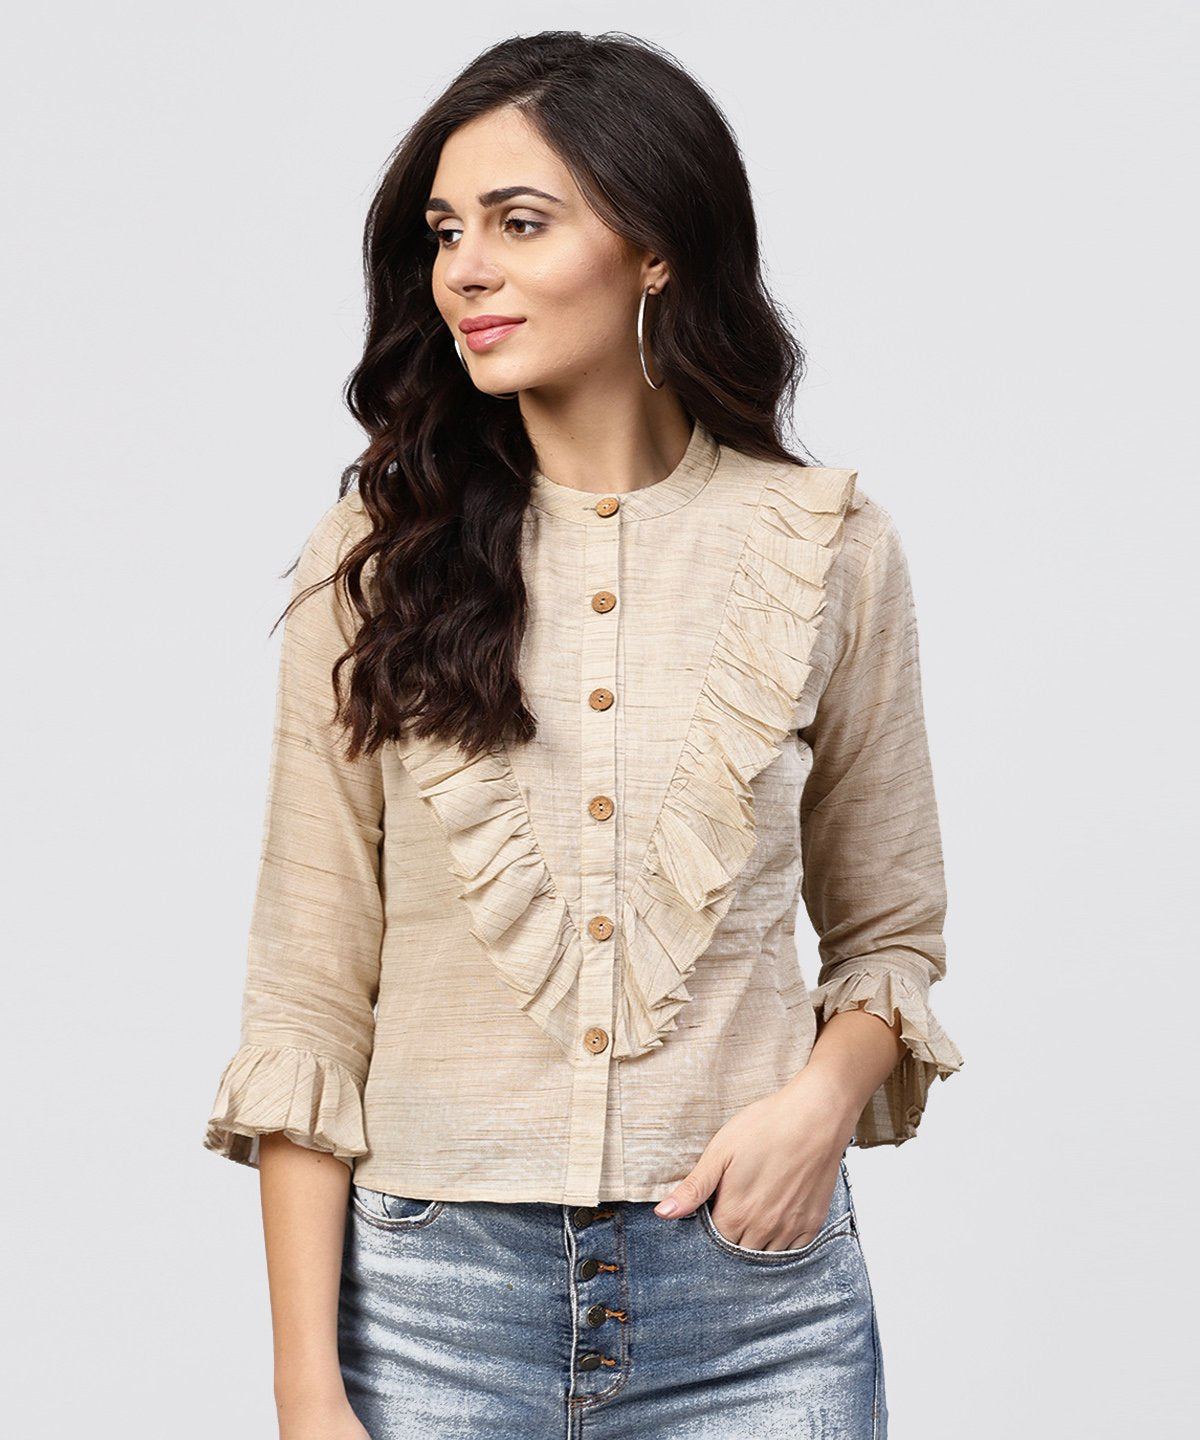 Women's Ruffled Yoke With Open Center Placket Top With Pleated Sleeves And Madarin Collar - Nayo Clothing